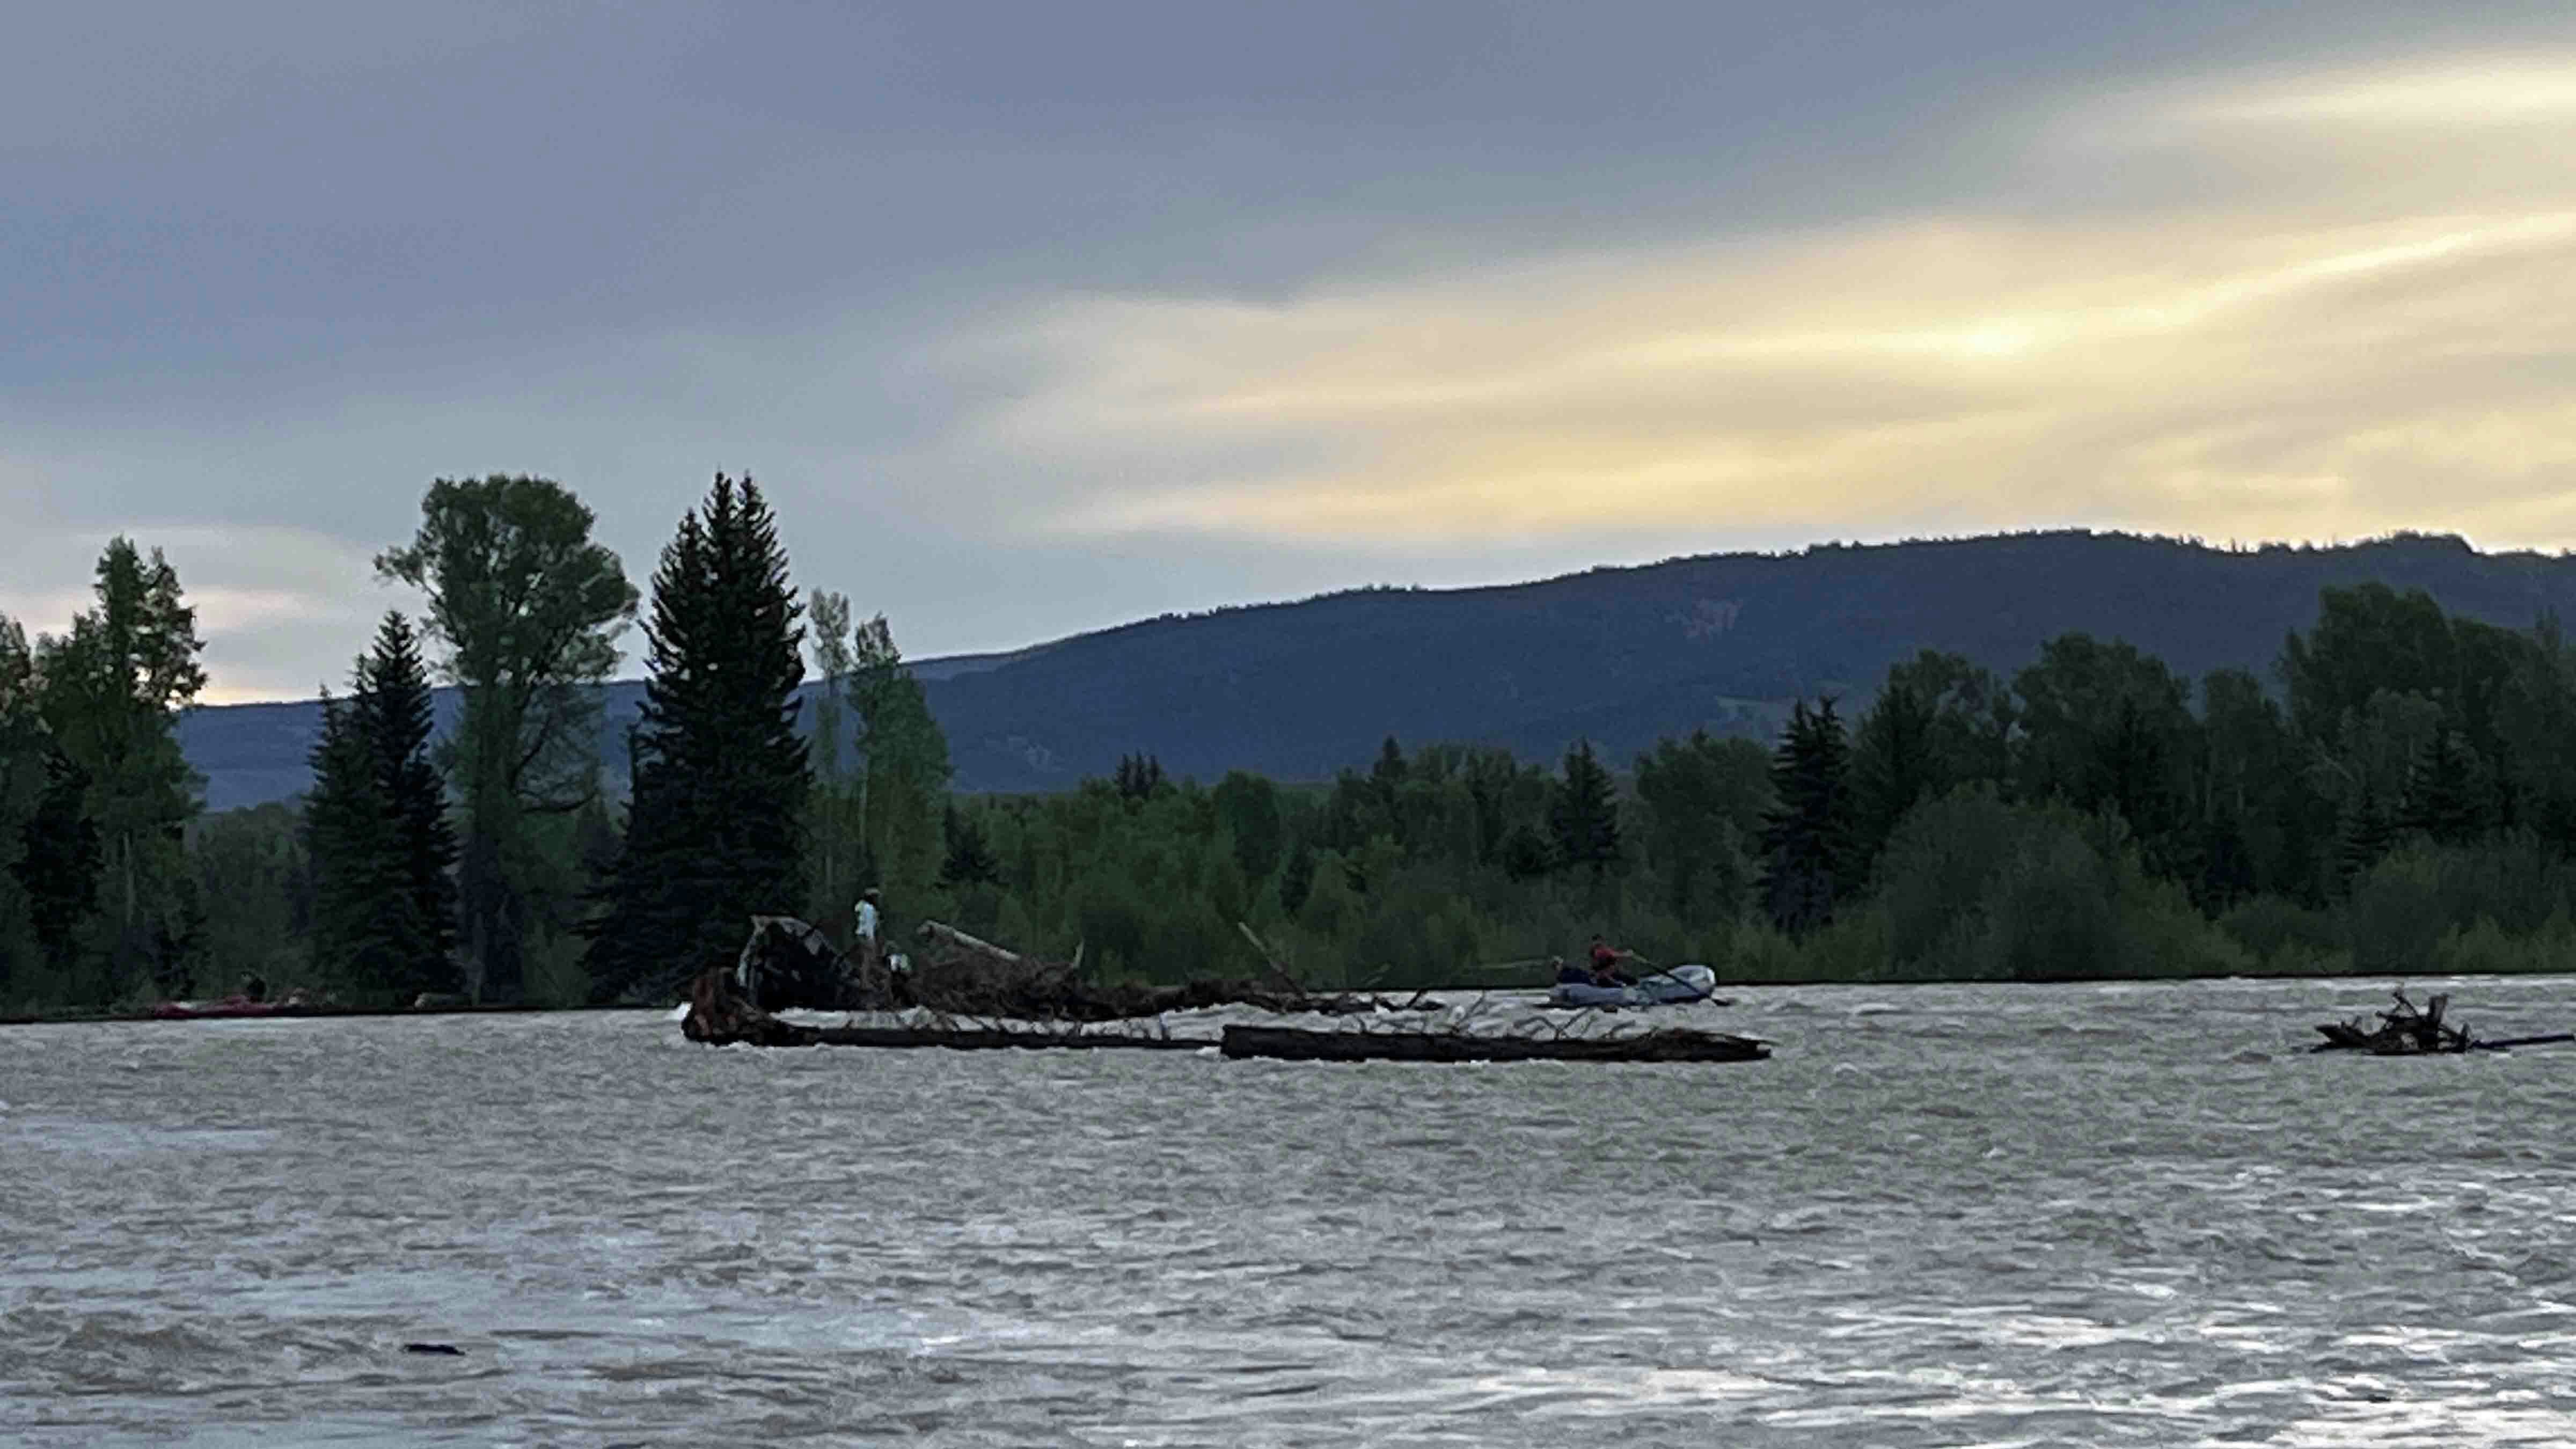 Rescuers try to reach stranded rafters, after their raft hit a snag and flipped in the Snake River in Grand Teton National Park late Saturday.